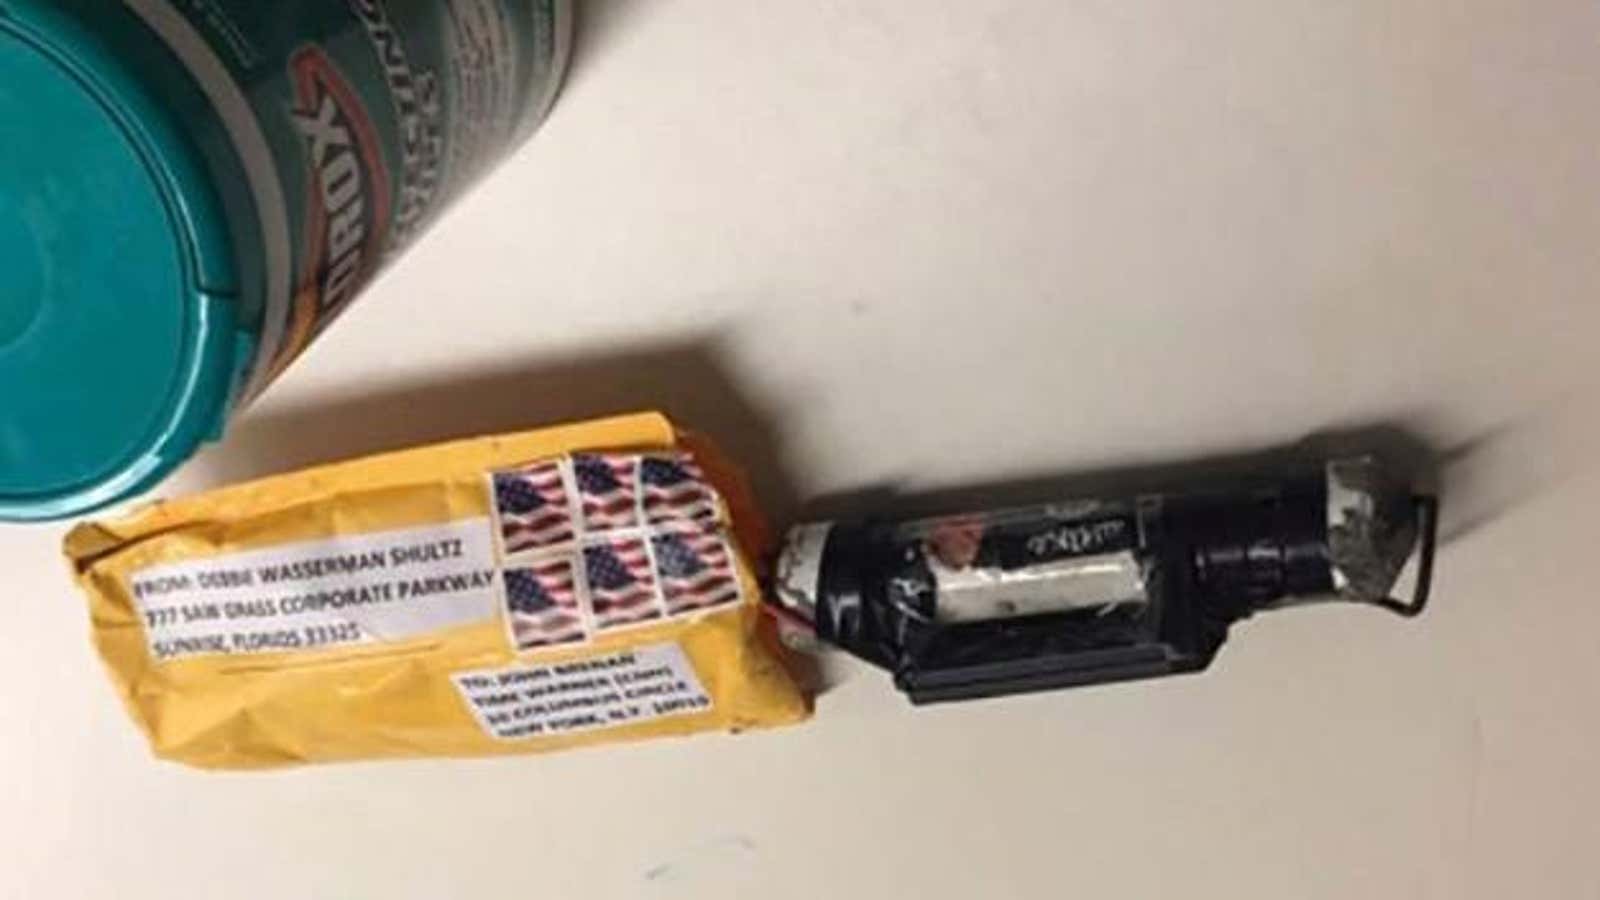 This pipe bomb addressed to John Brennan was sent to CNN’s New York offices in the Time Warner Center.